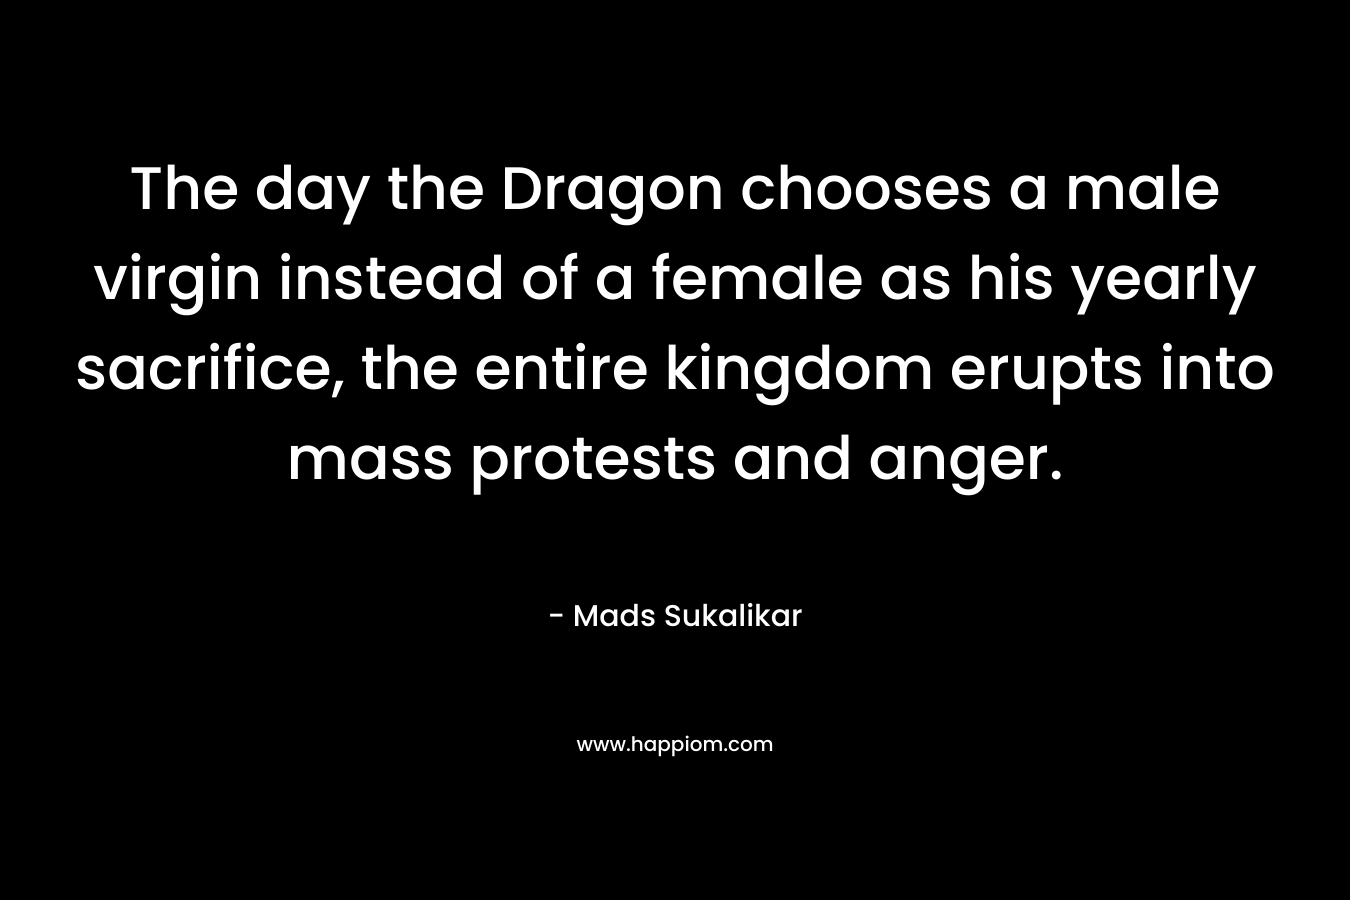 The day the Dragon chooses a male virgin instead of a female as his yearly sacrifice, the entire kingdom erupts into mass protests and anger.